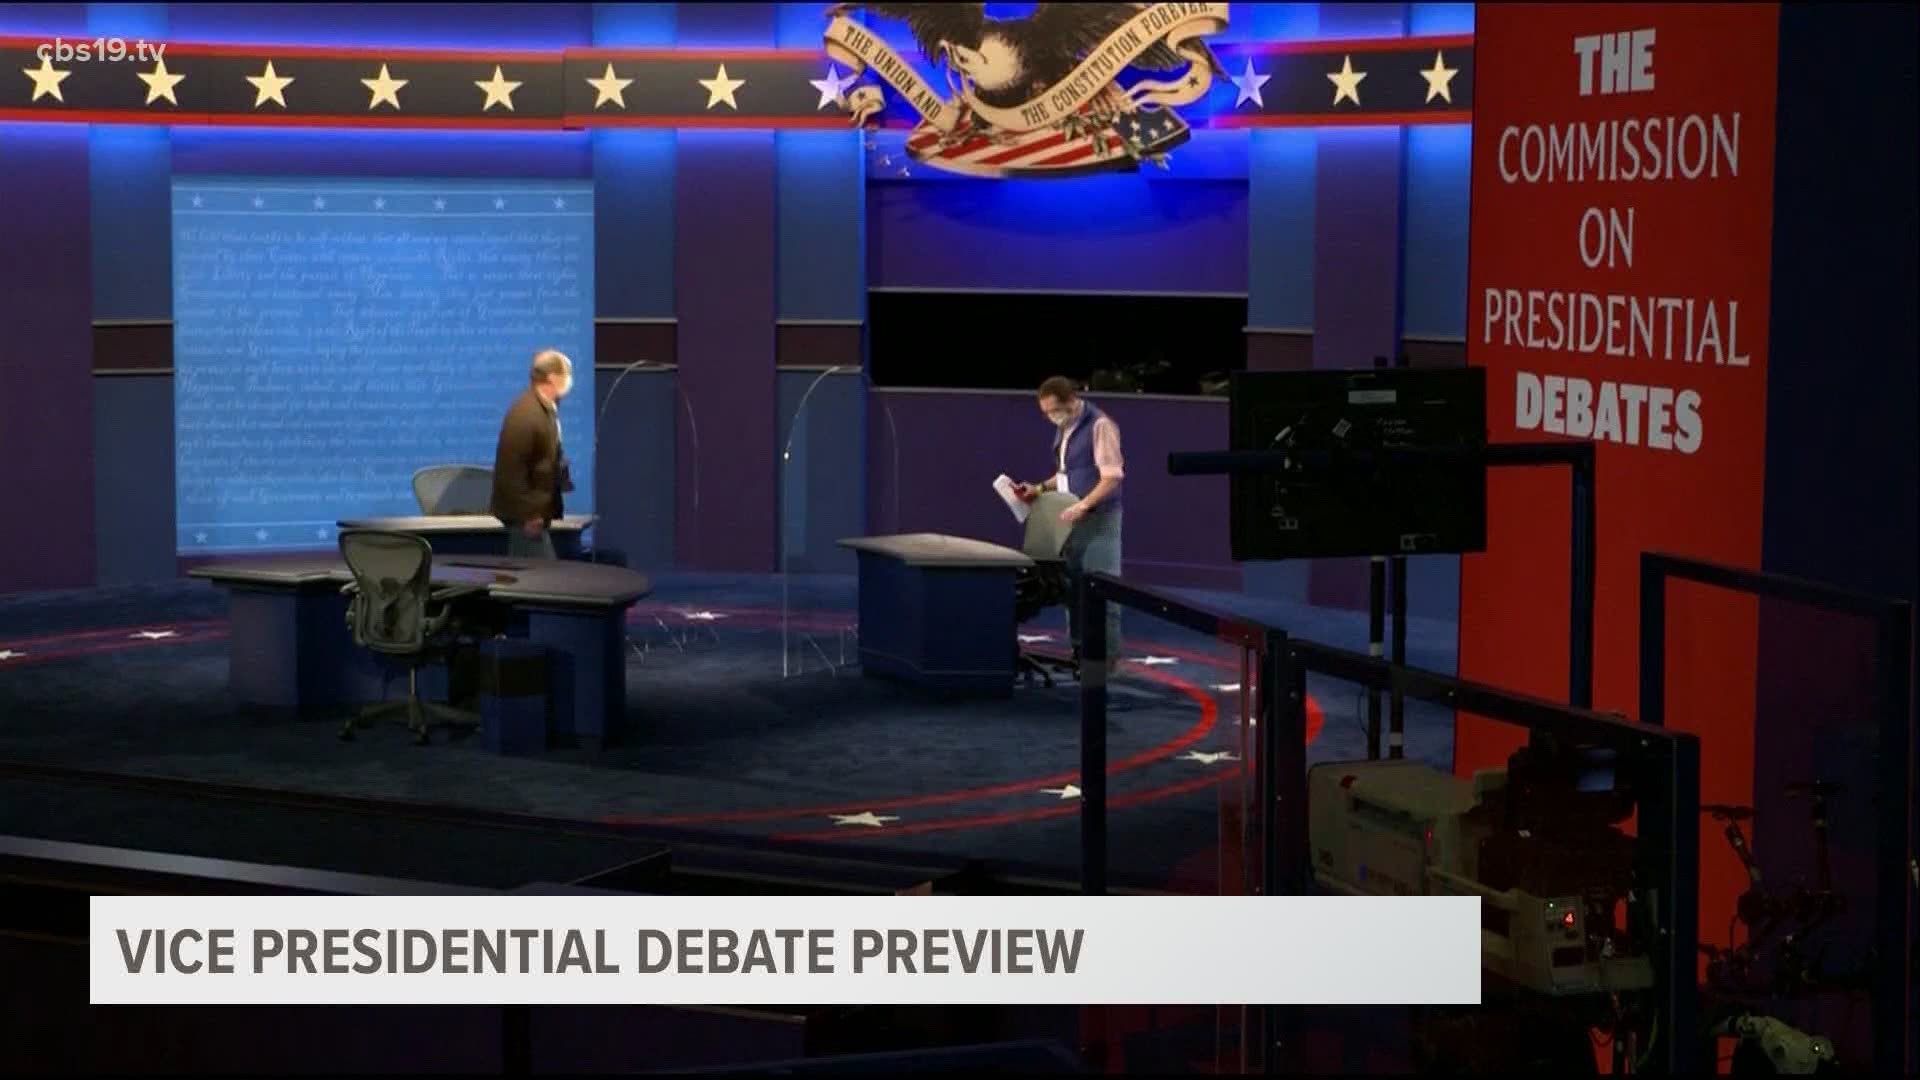 Two East Texas political science professors say tonight's debate is a chance to showcase the parties at their best